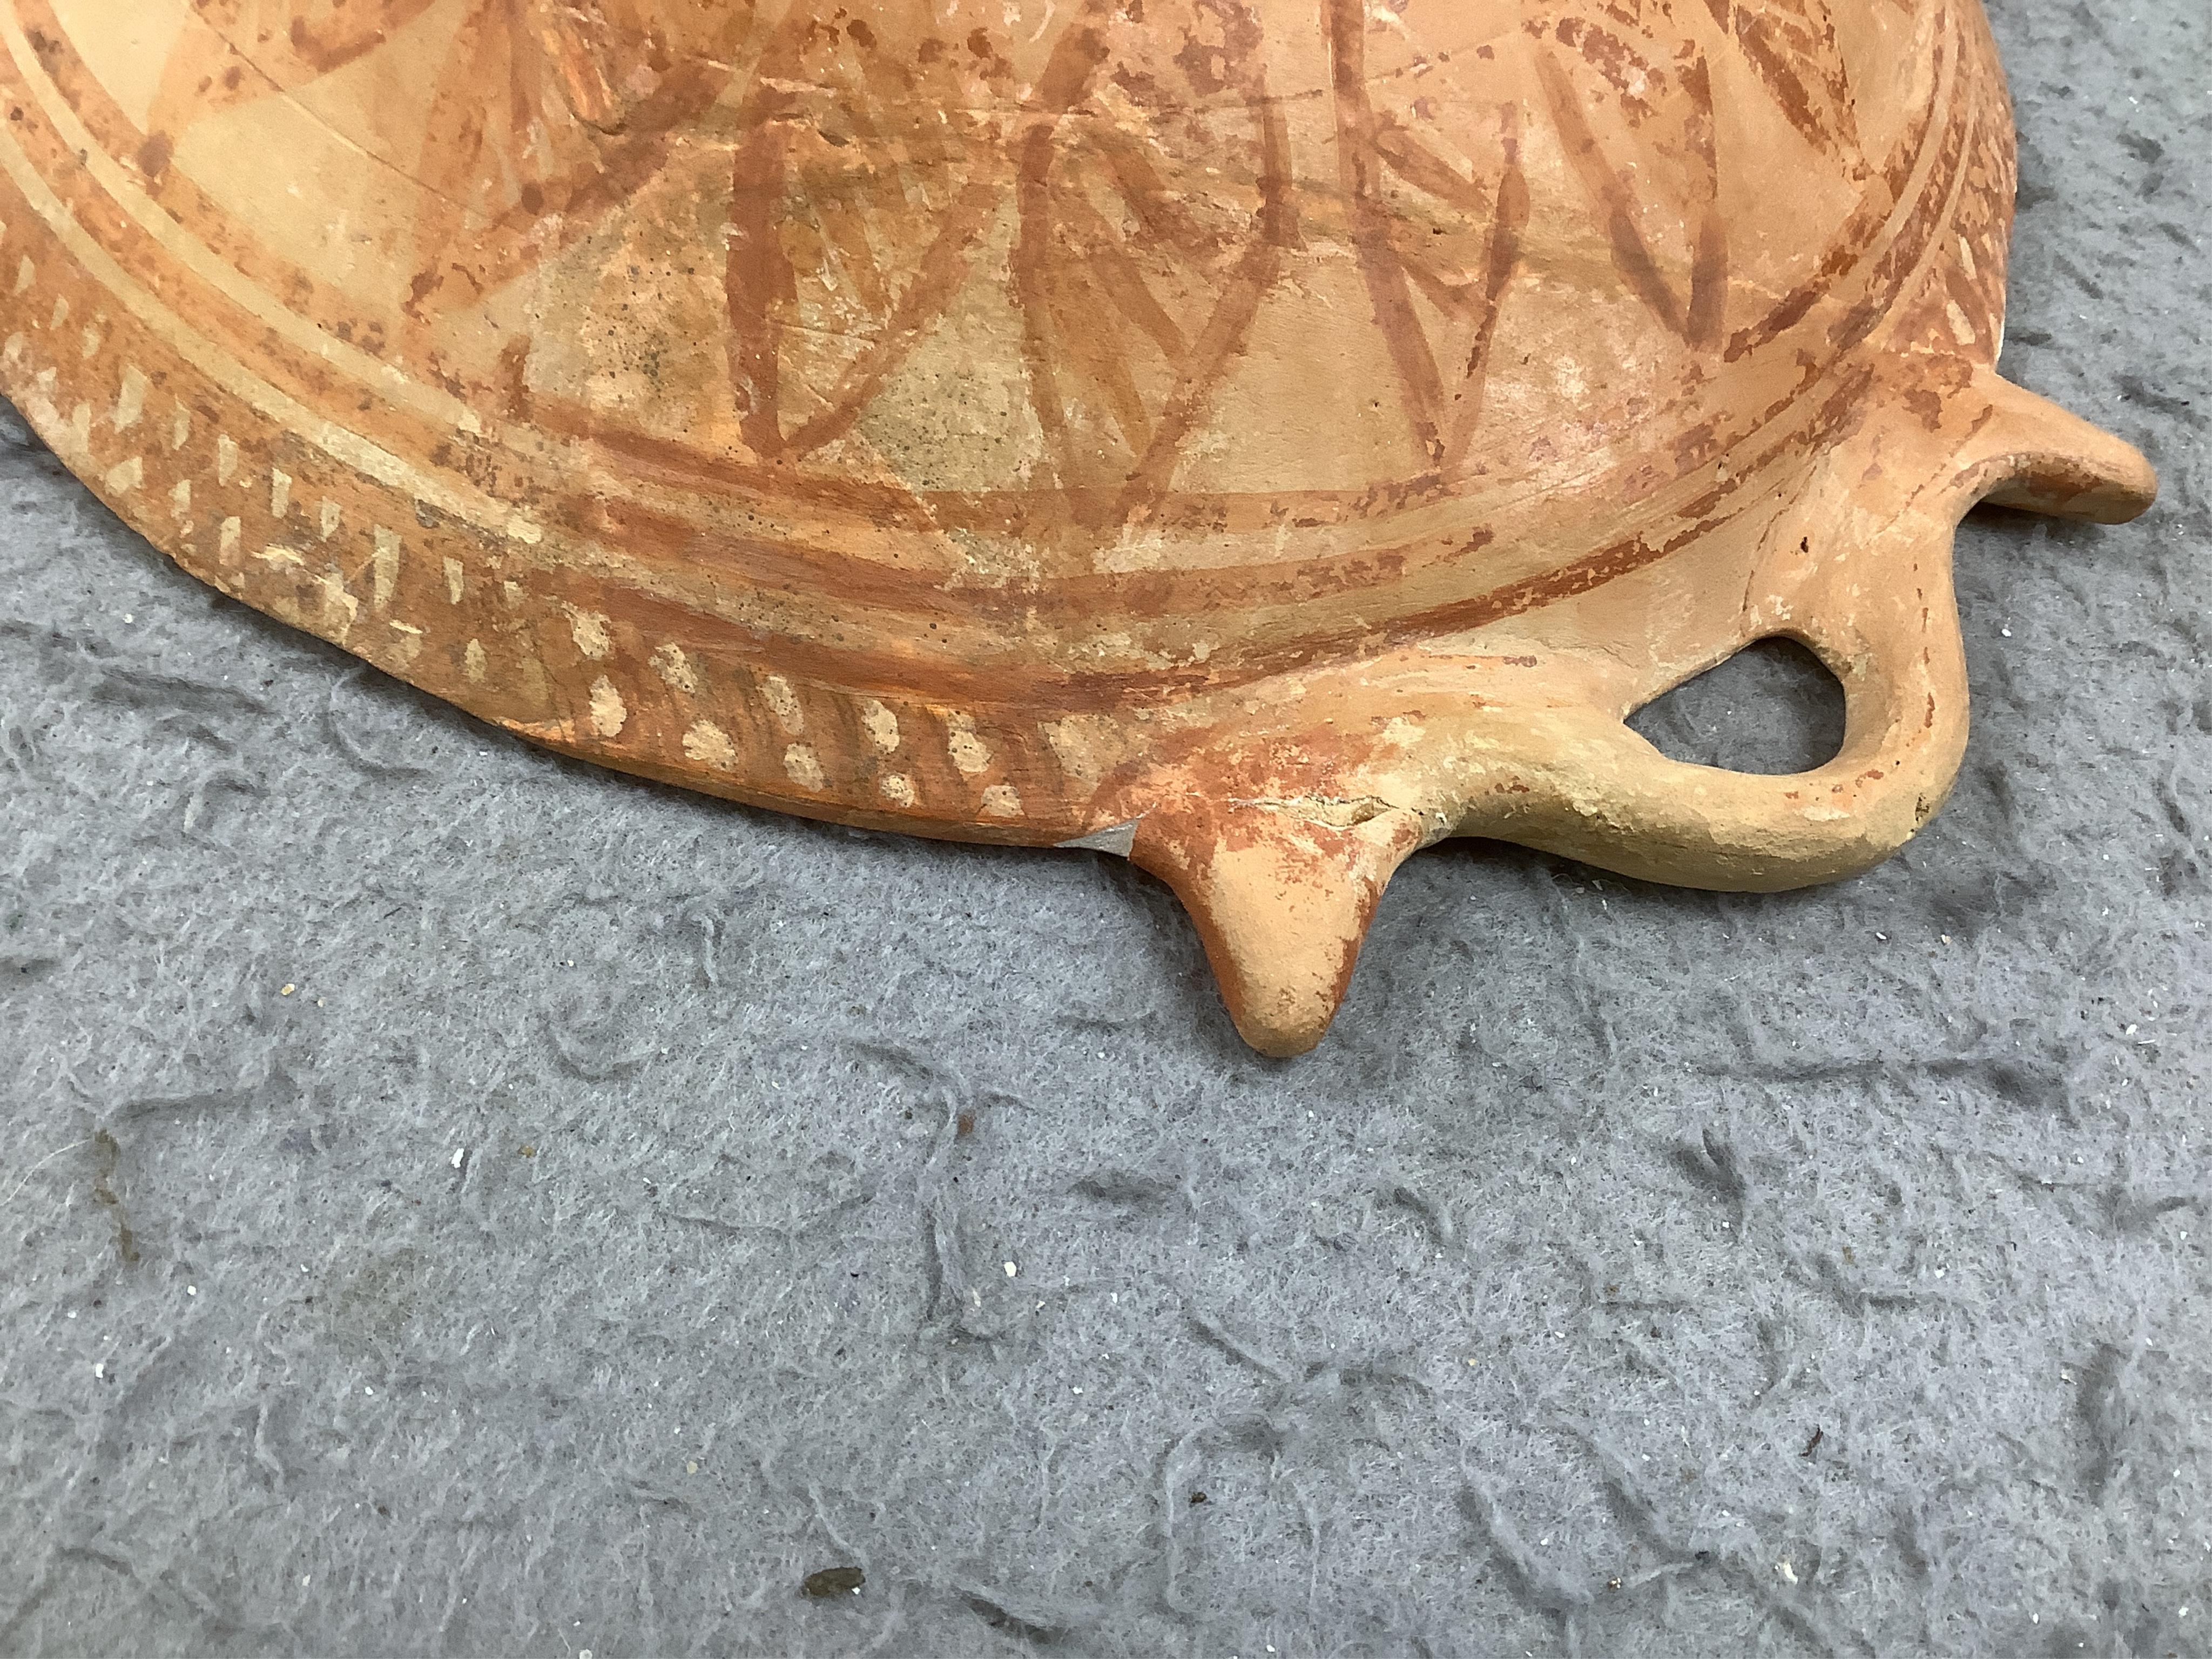 An Ancient Greek terracotta two-handled dish, circa 5th/4th century BC. Condition - good restored condition